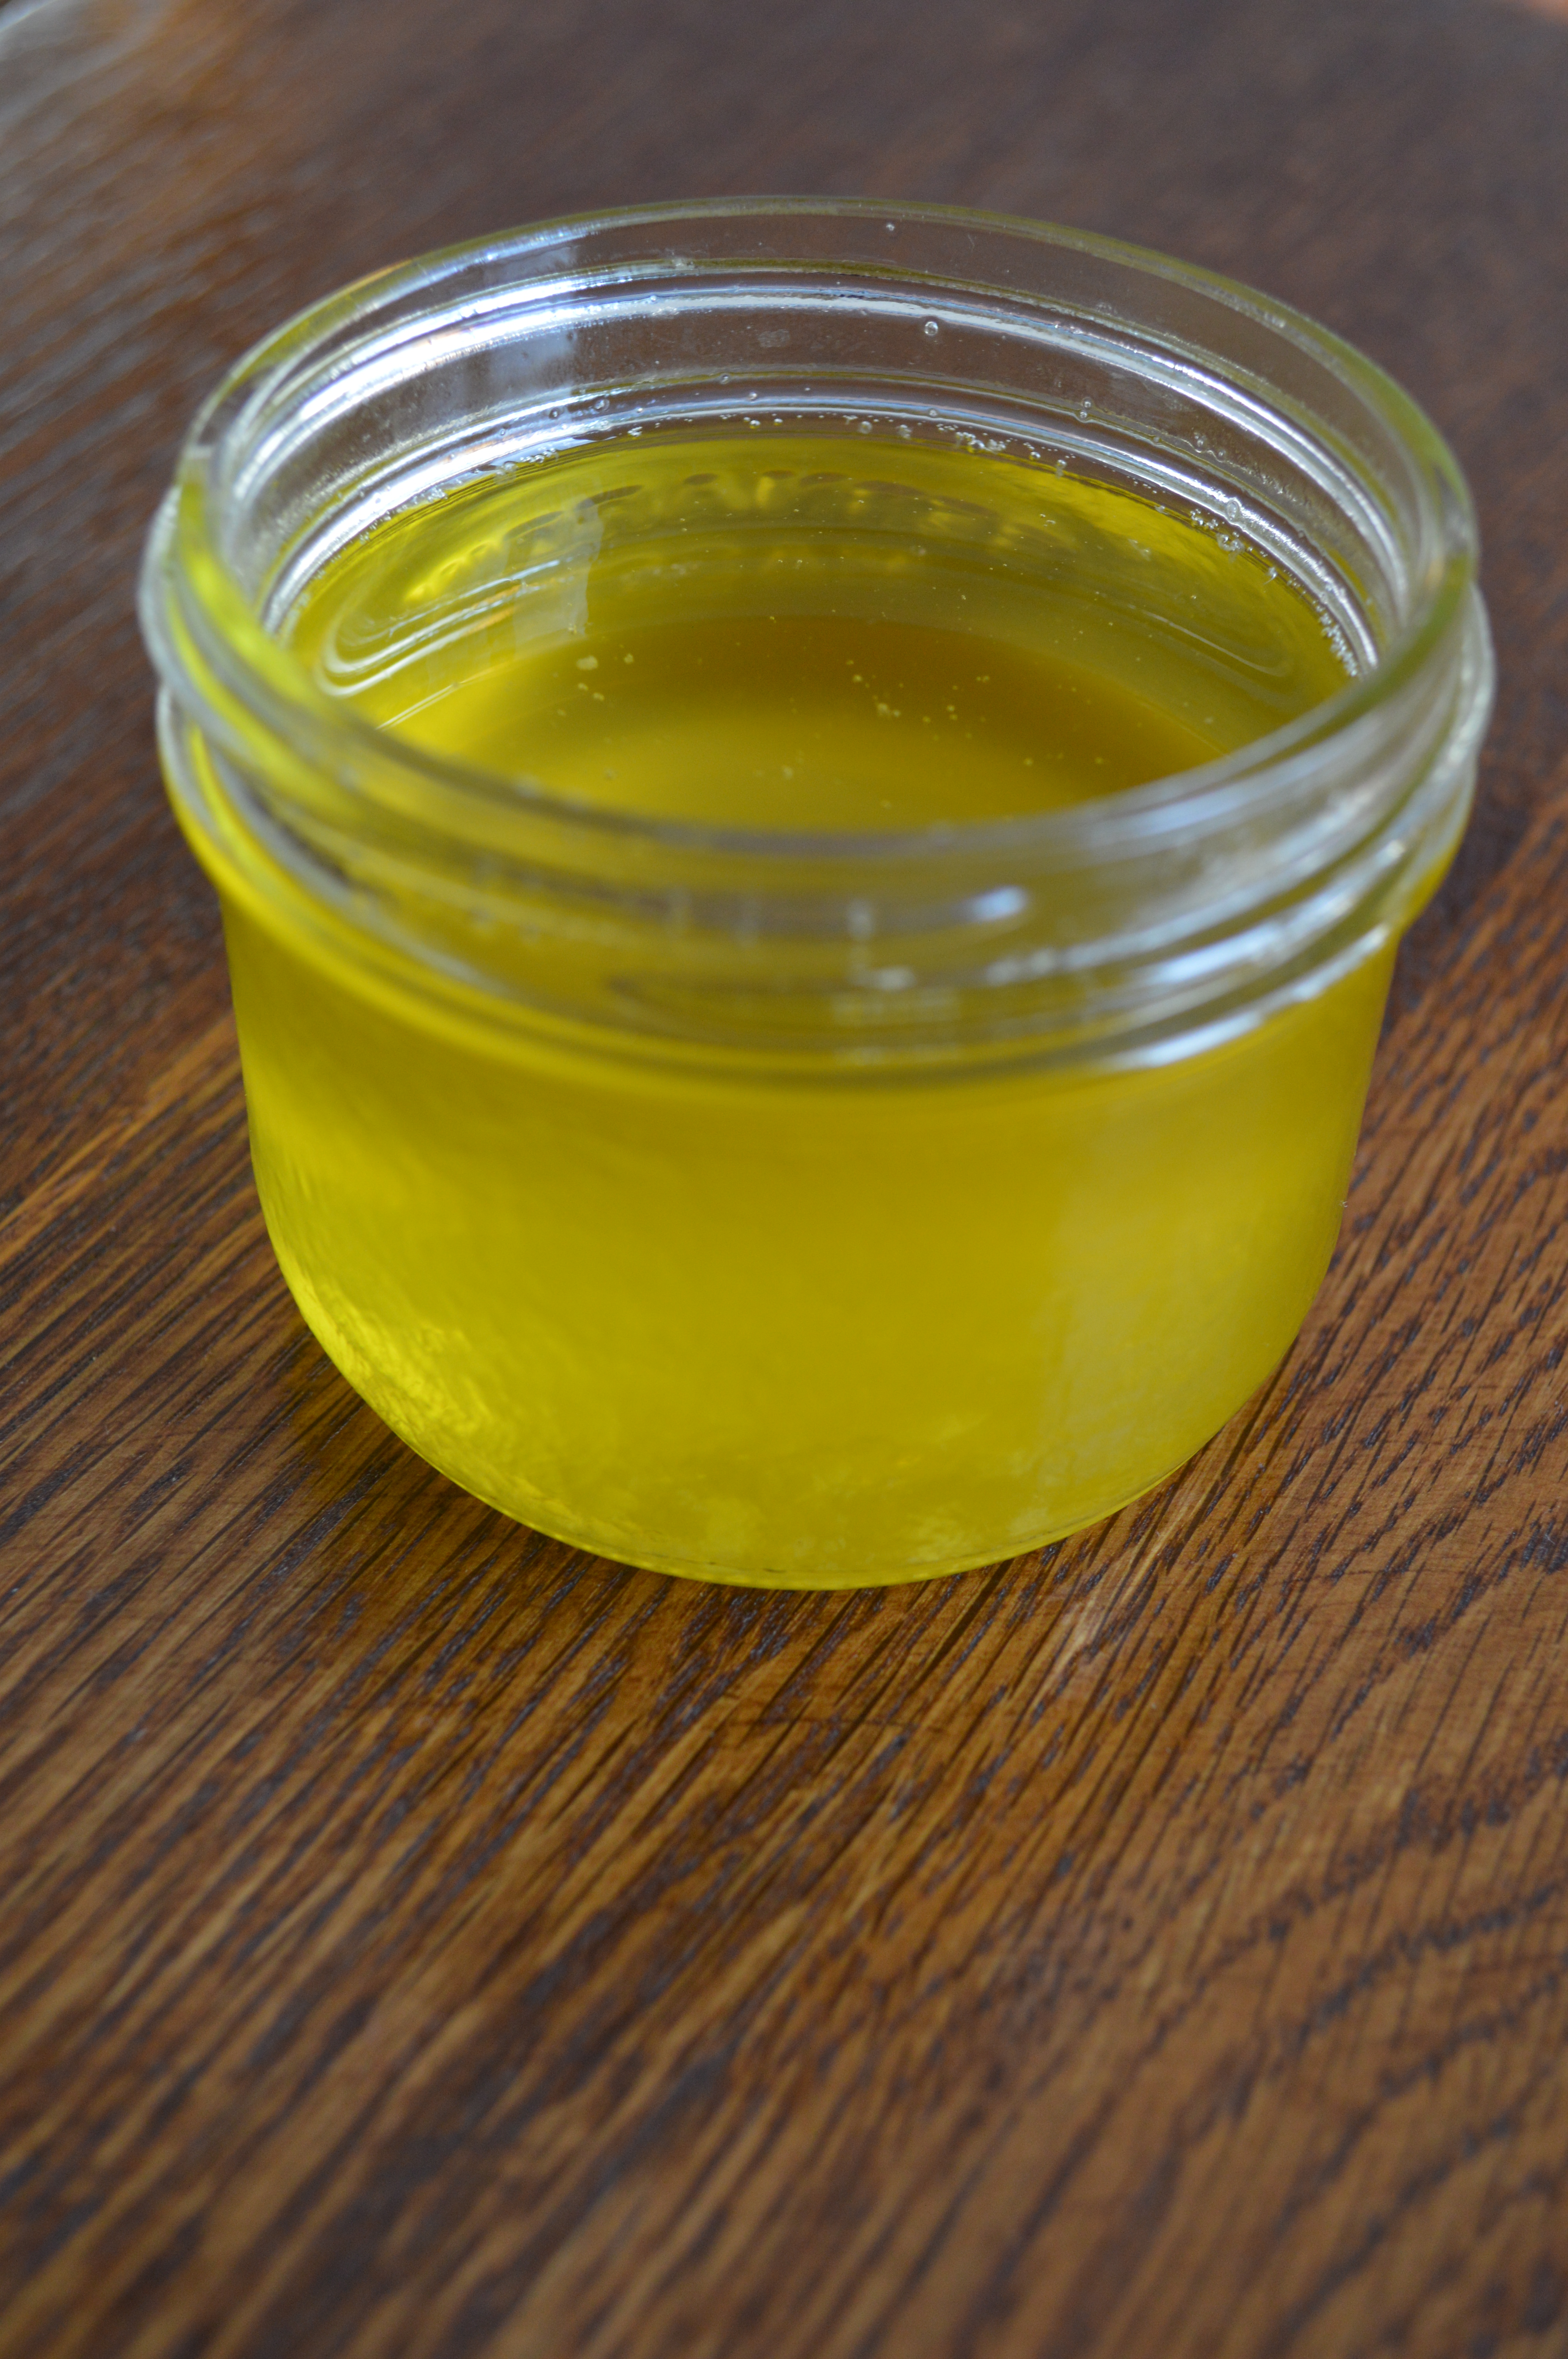 A jar of radiant, clarified butter.